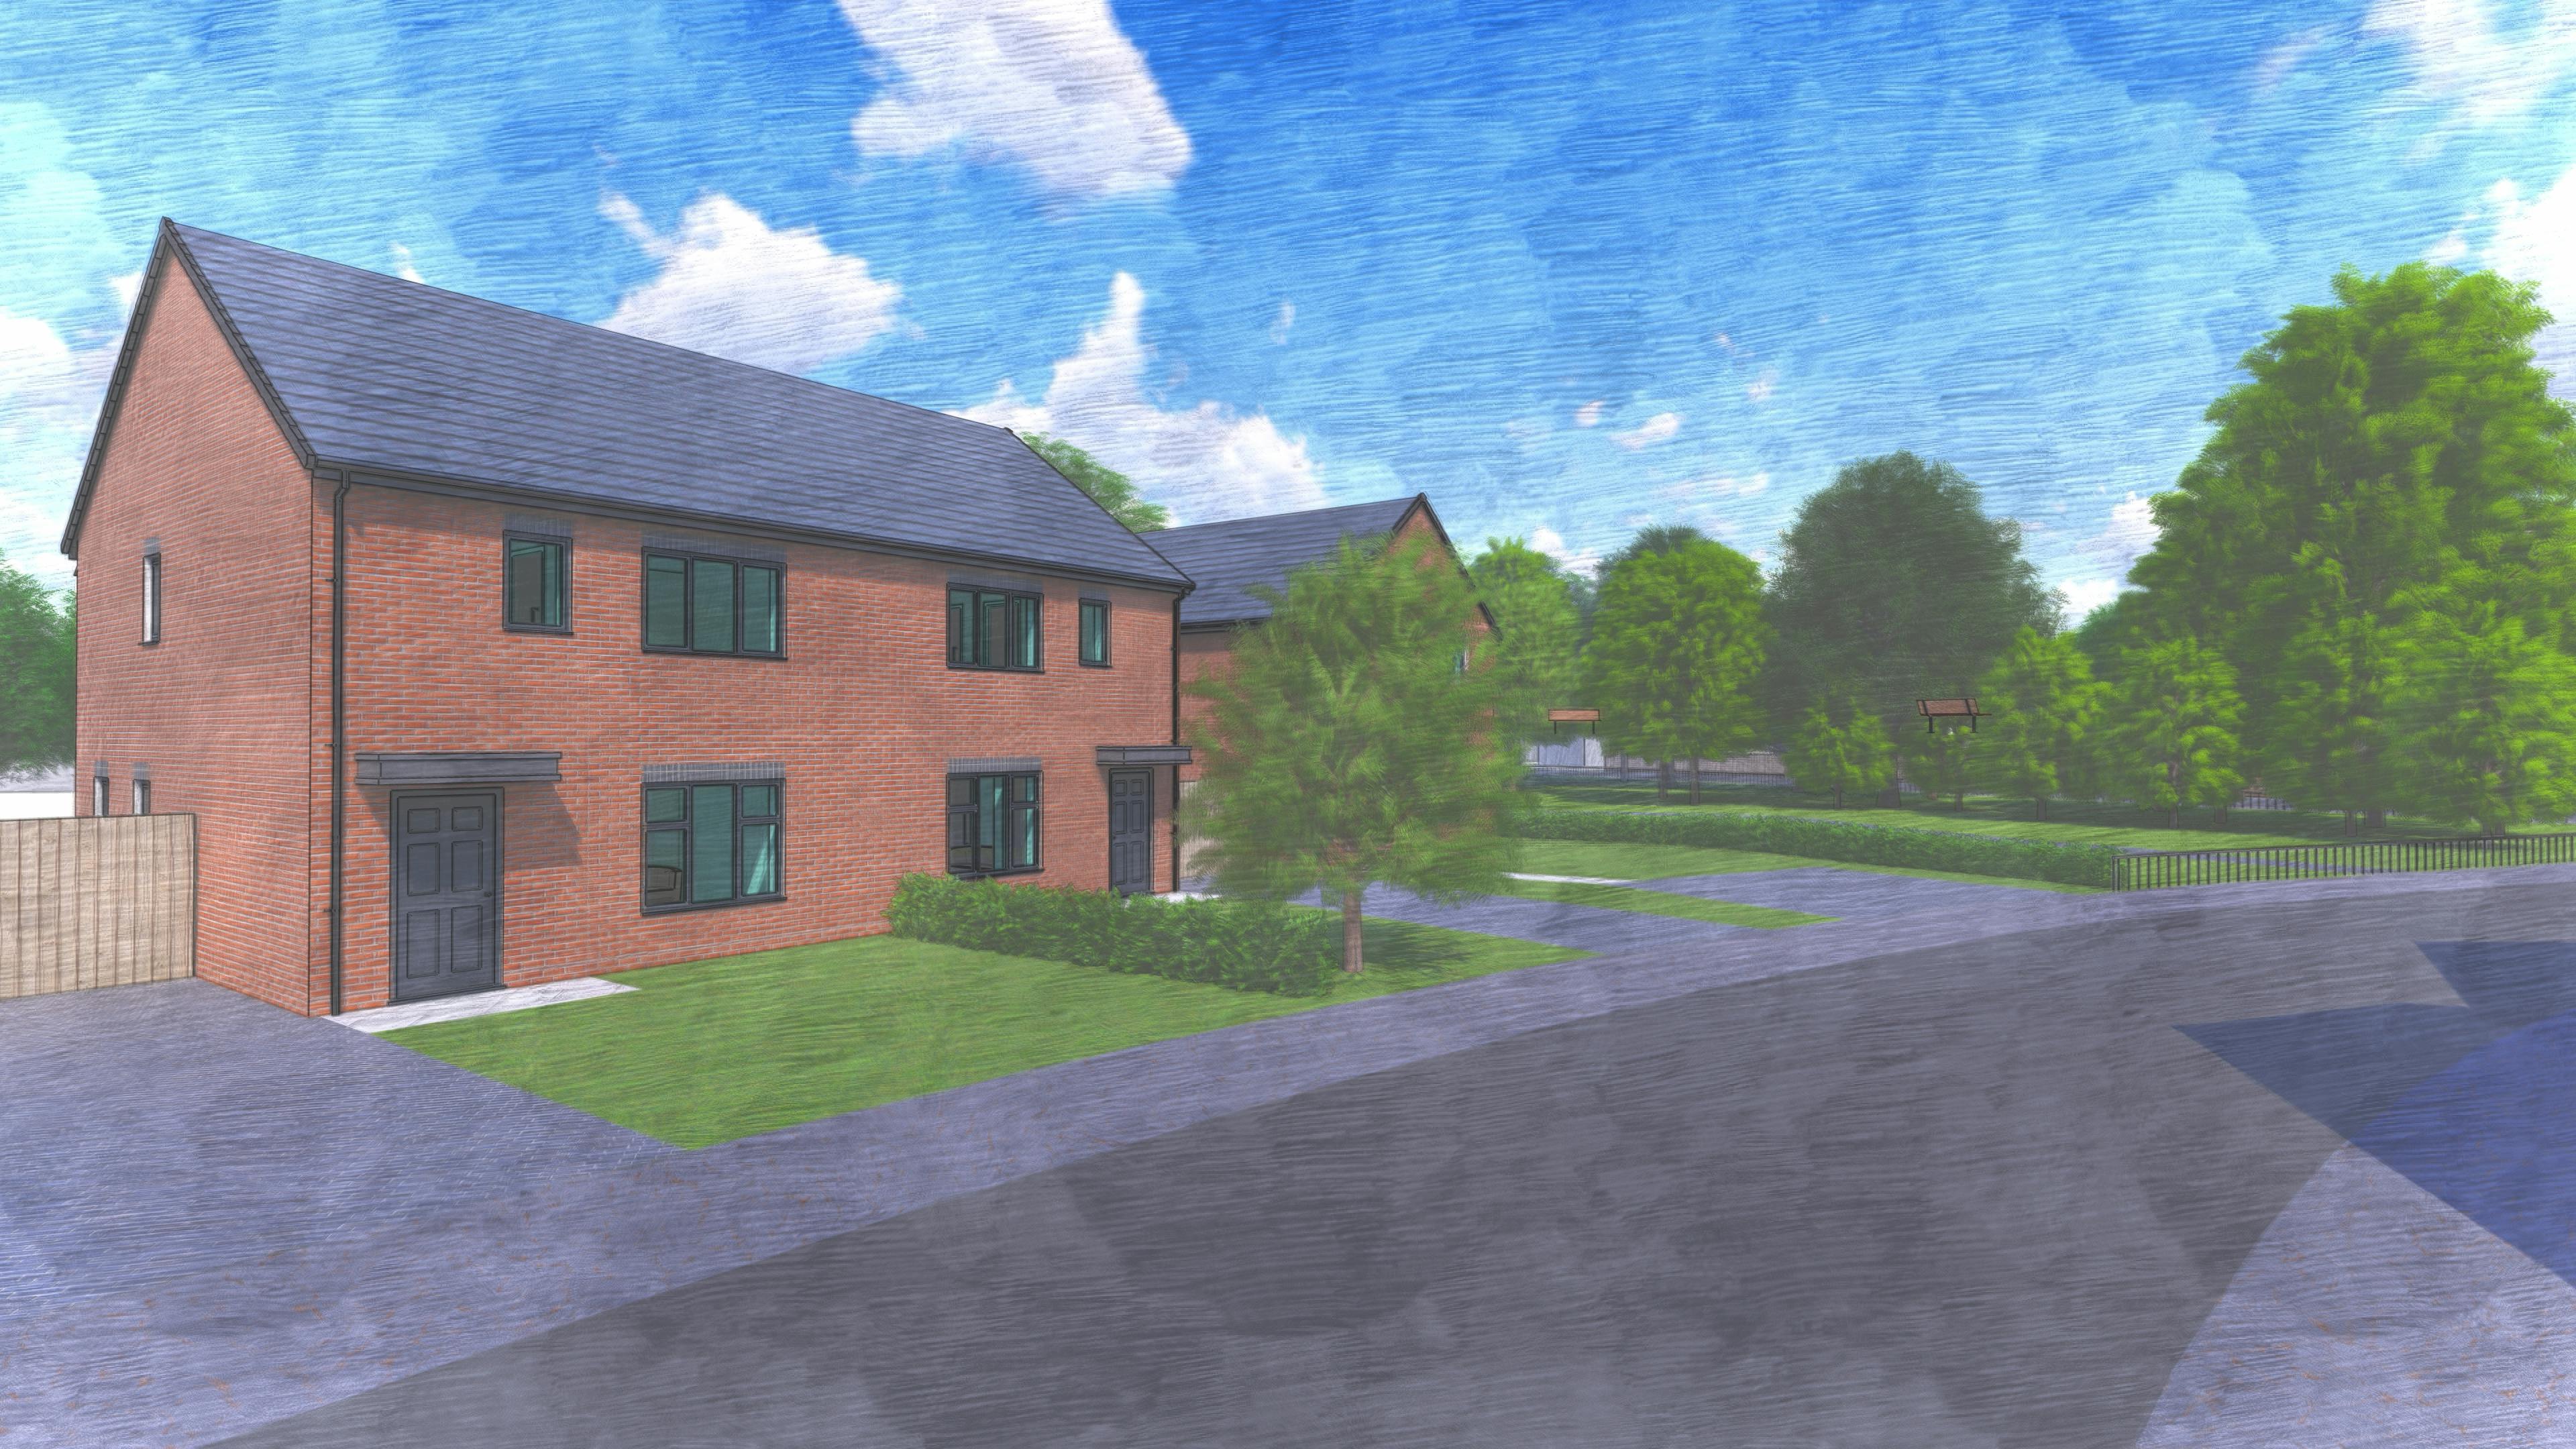 Hough Top Court: Artist's Impression - Views of the proposal looking out towards the existing surrounding greenery.jpg